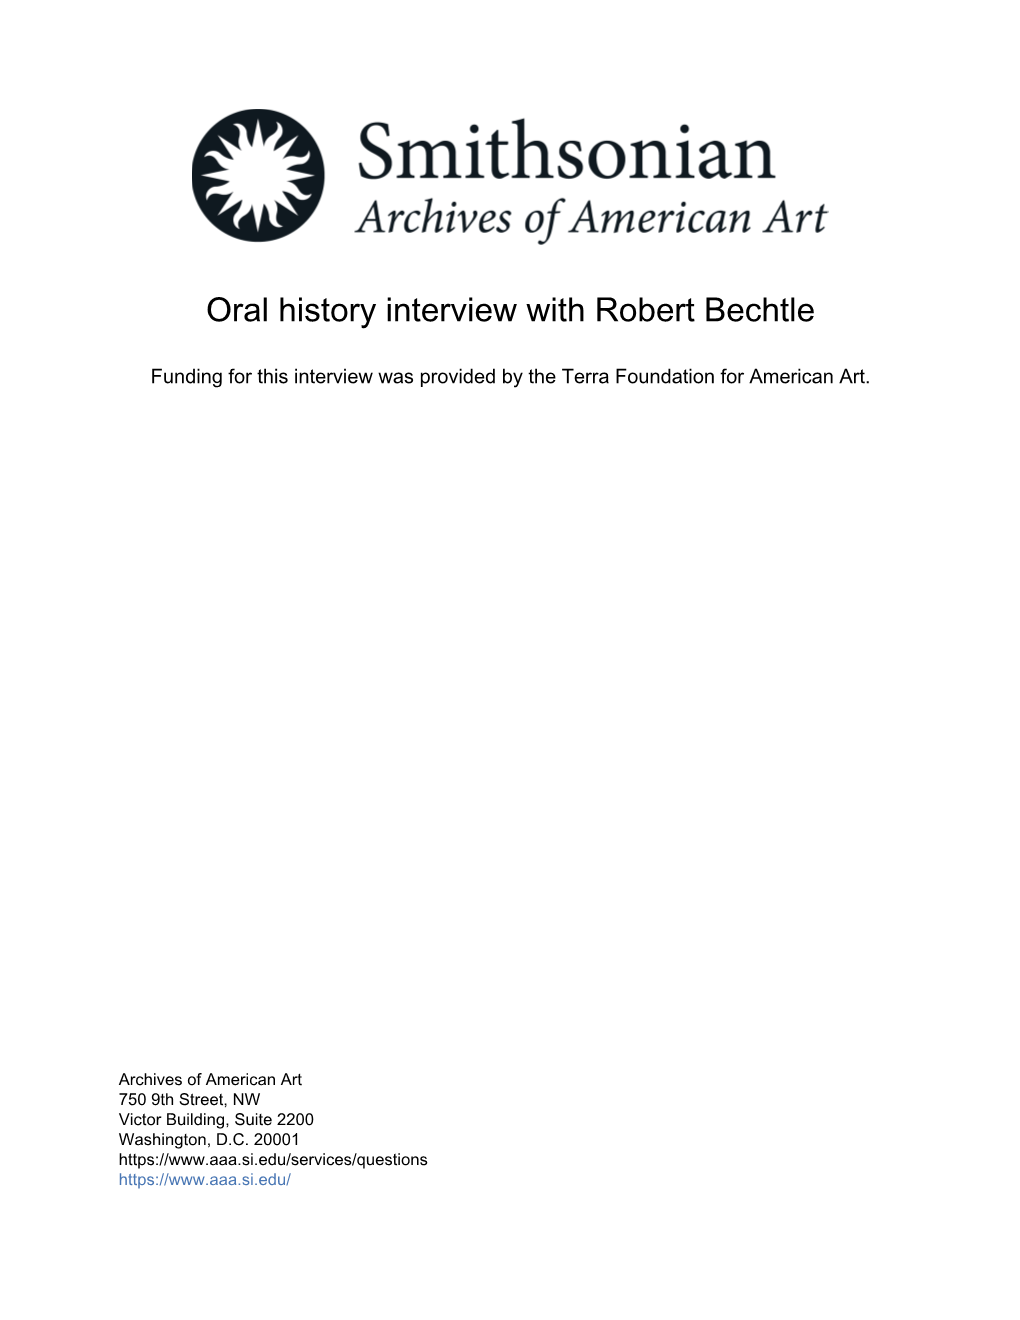 Oral History Interview with Robert Bechtle